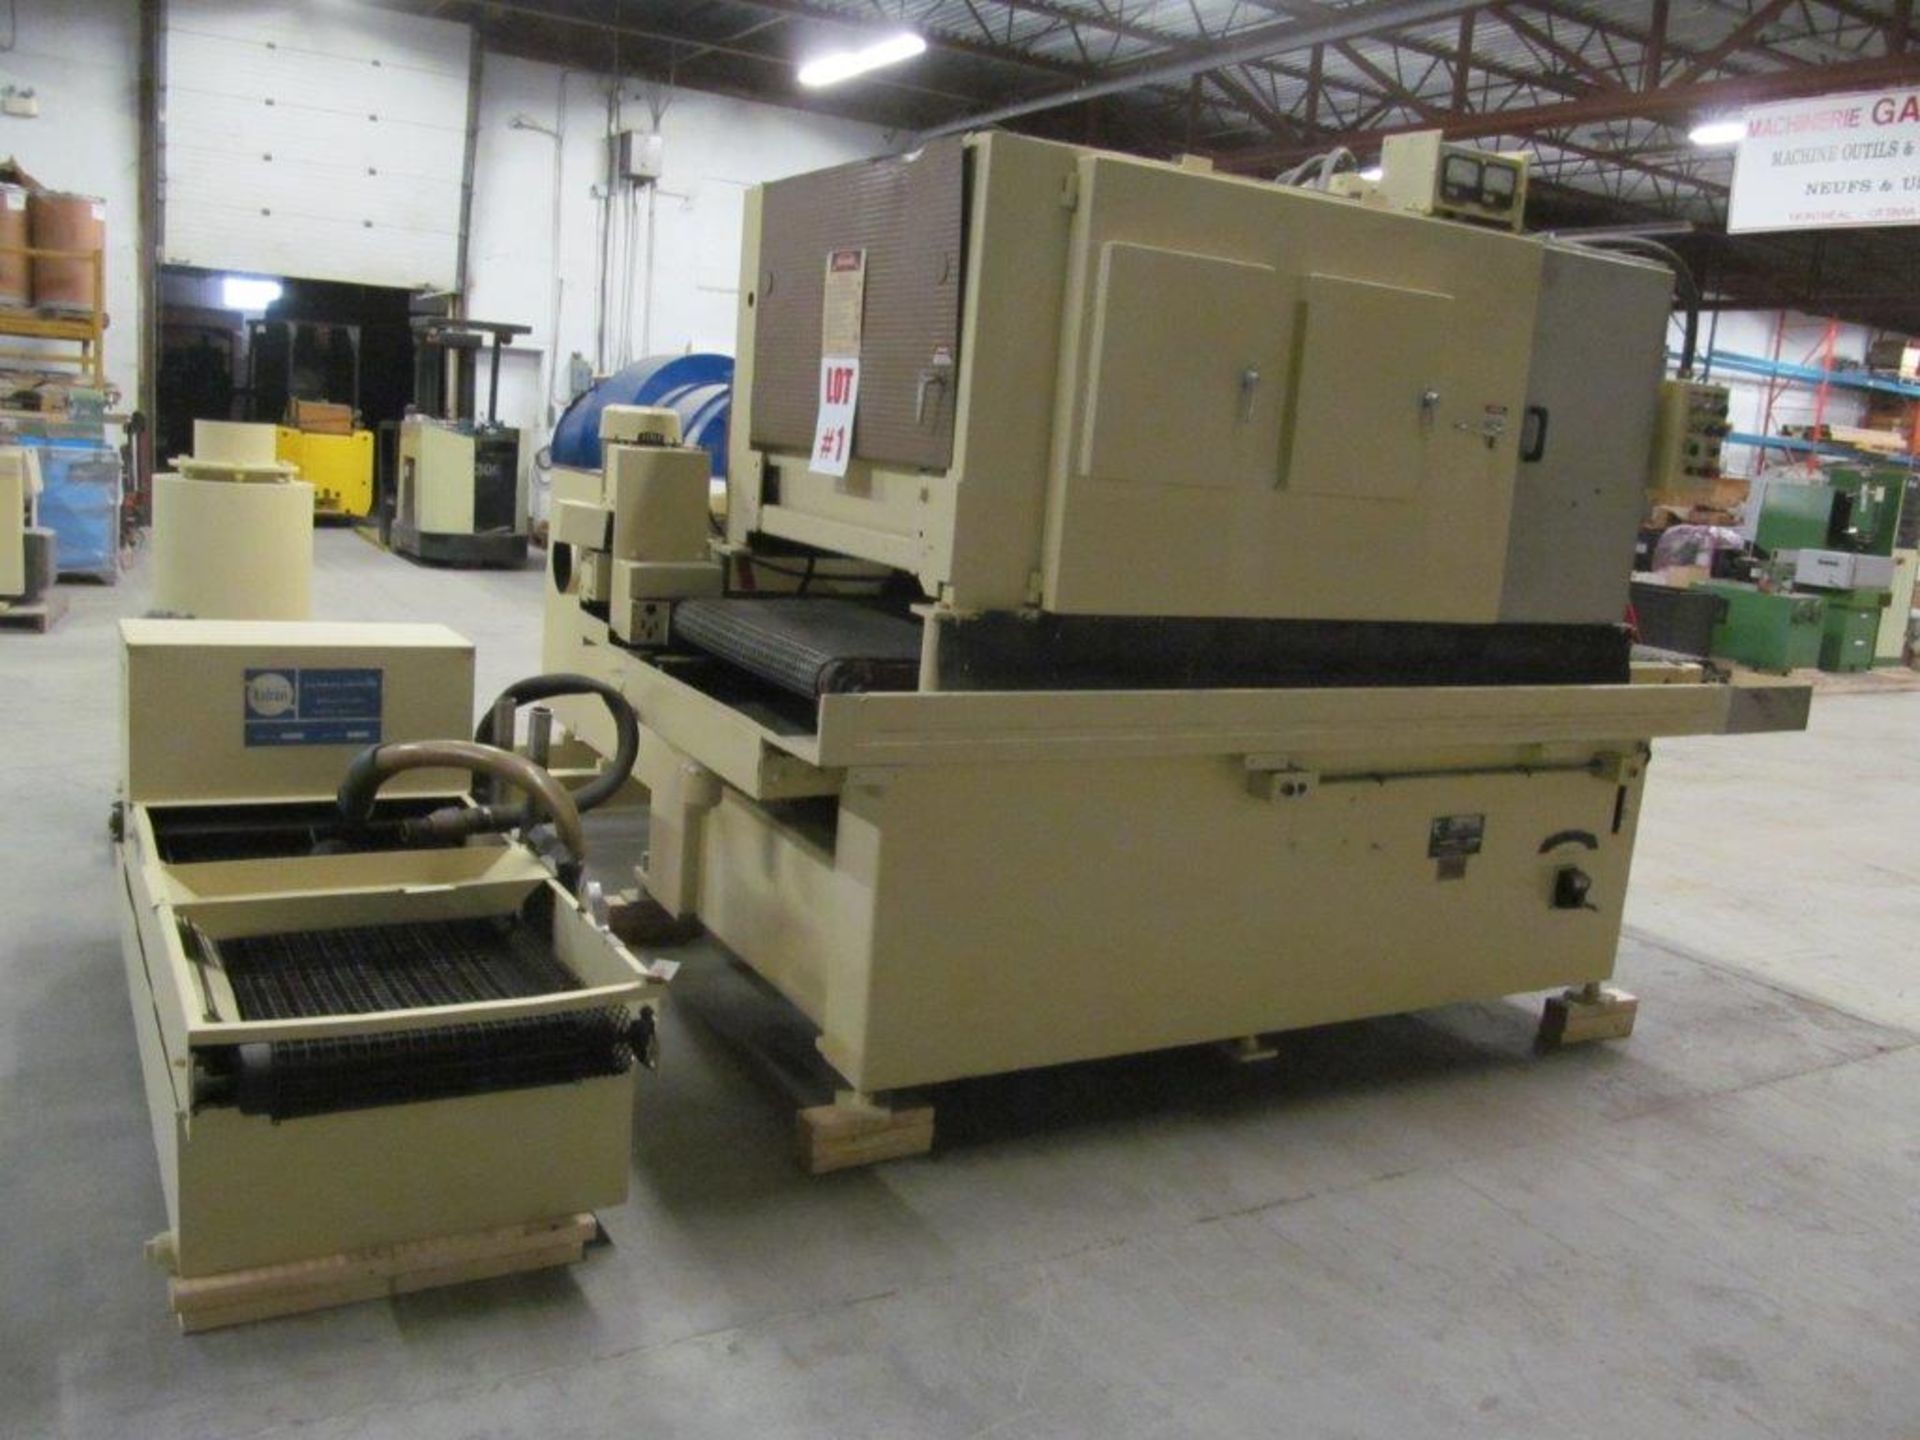 TIMESAVER MODEL 237-2CMPLW, S/N: 19989, 36" WIDE MATERIAL WET TYPE, ELECTRICS: 575 V / 3PH / 60C, - Image 10 of 14